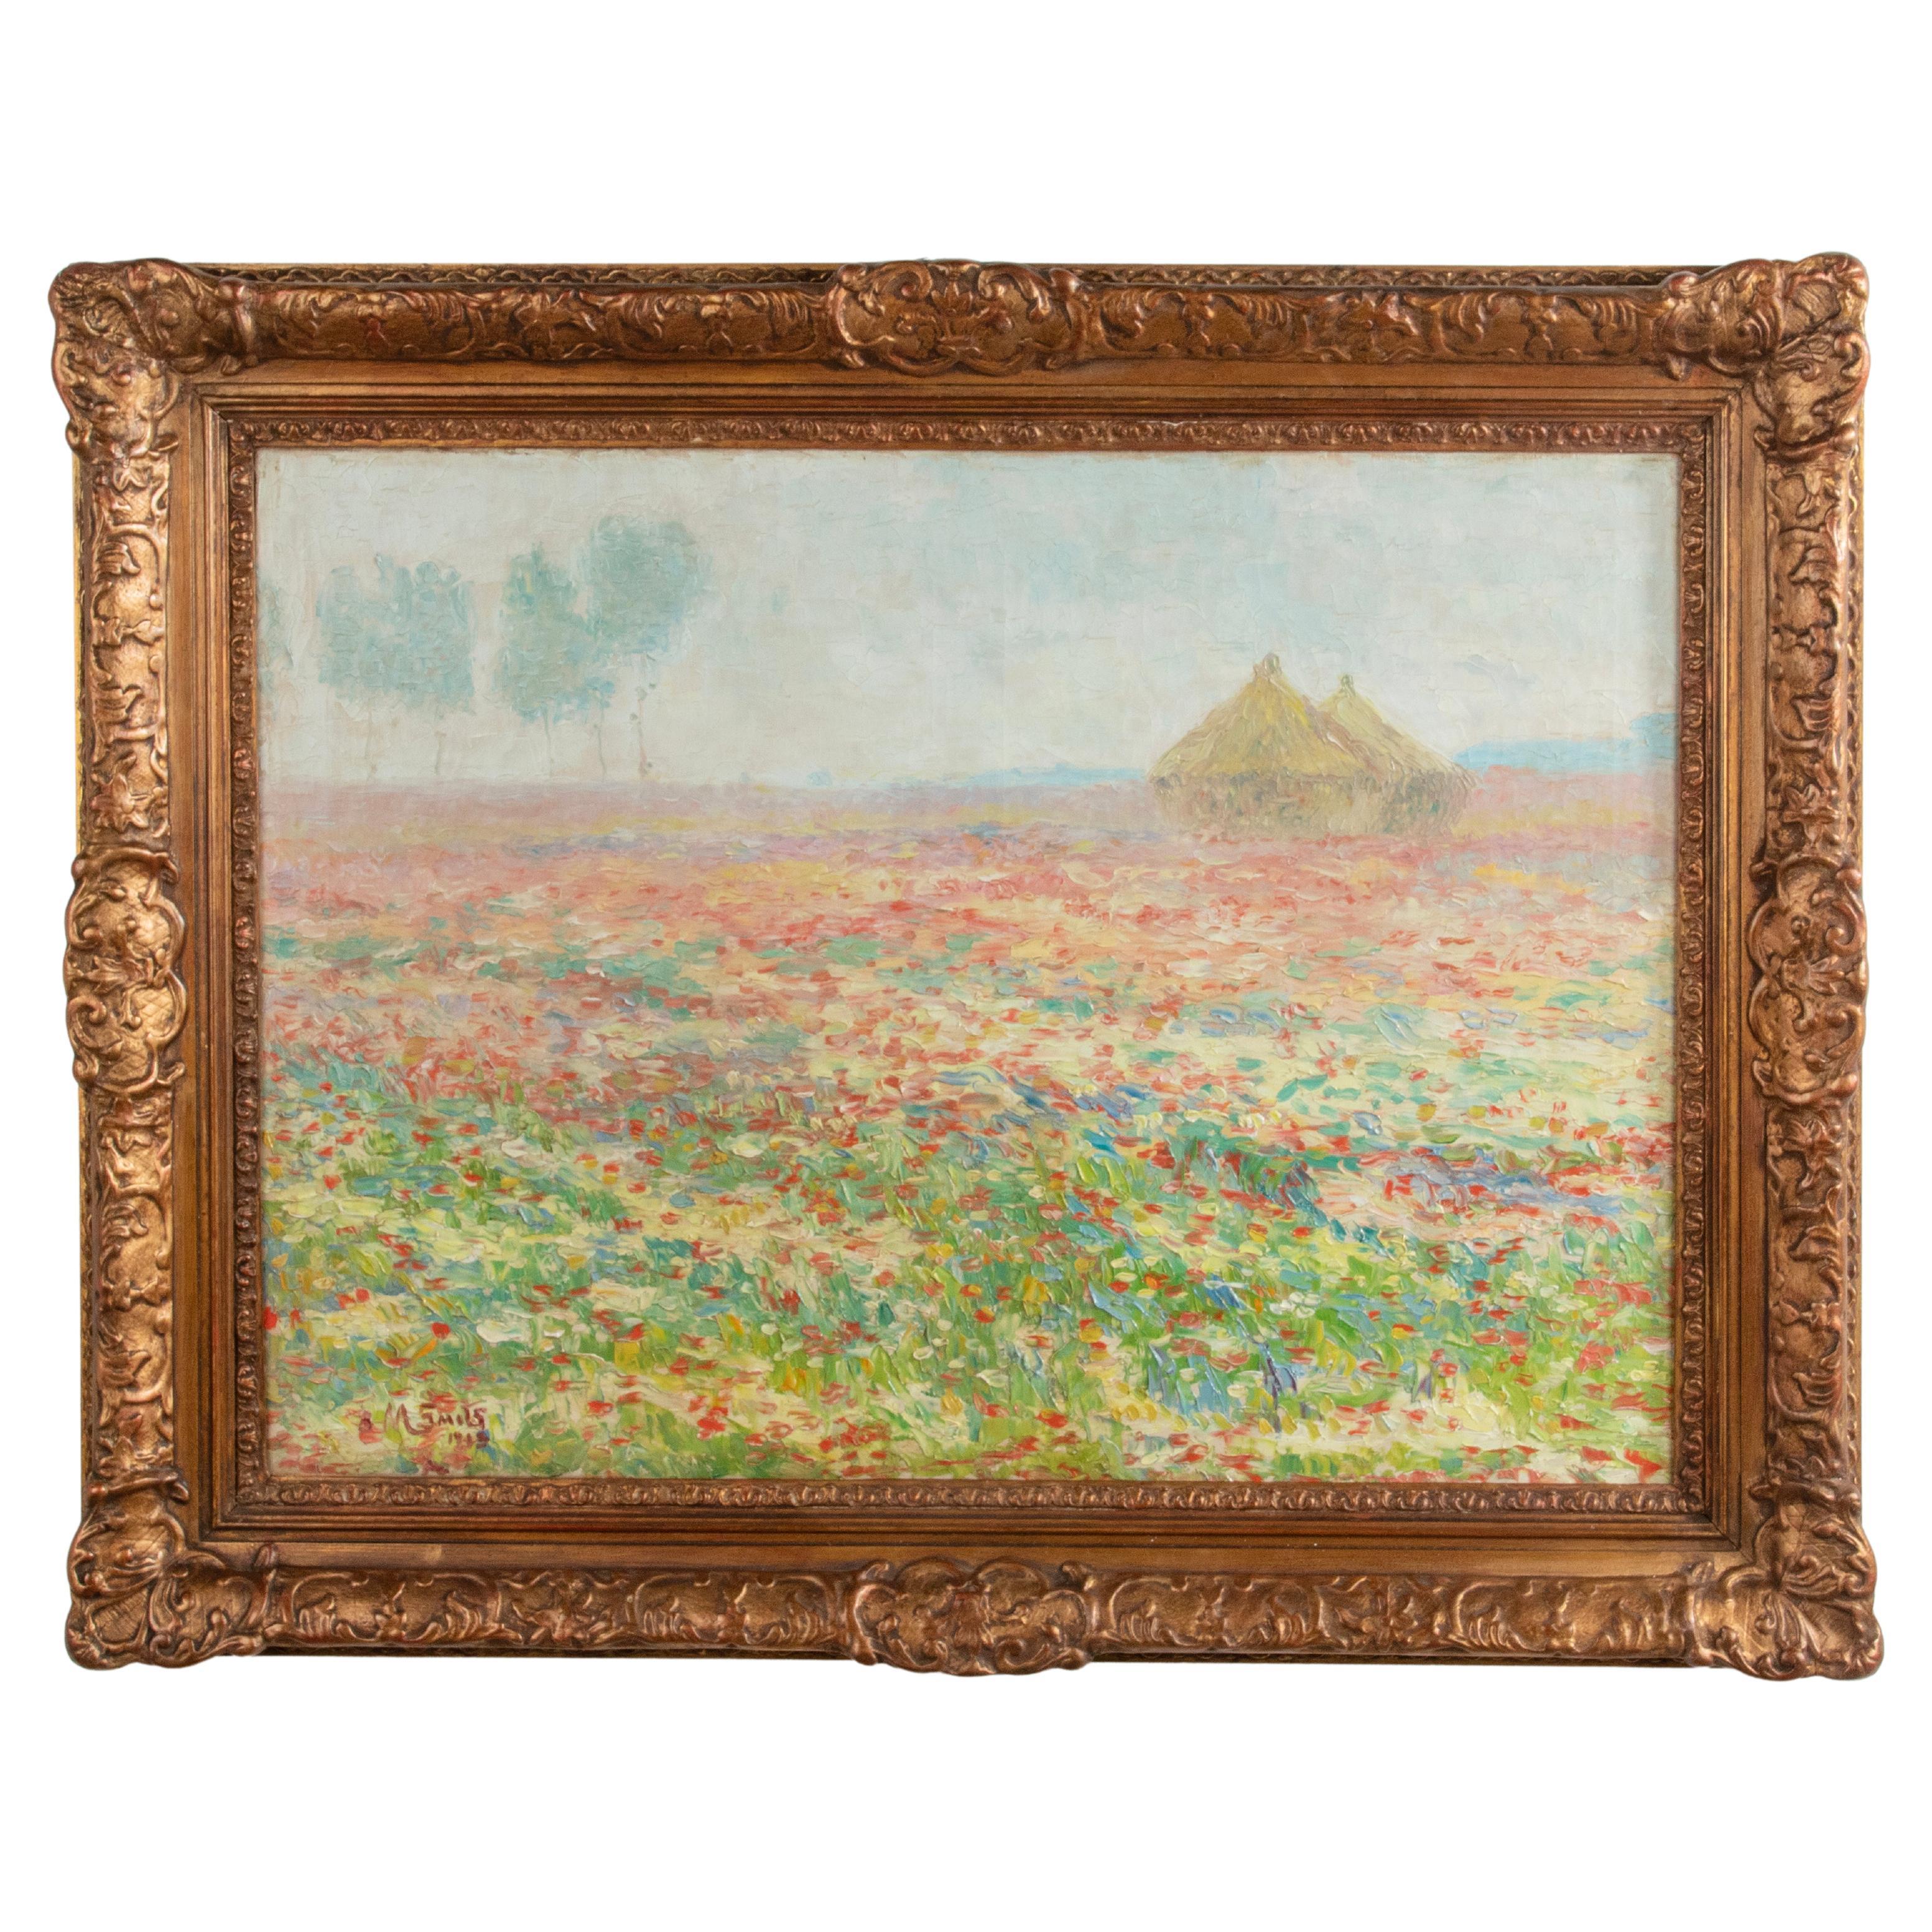 Early 19th Century Impressionistic Painting Signed and Dated E. Smits, 1913